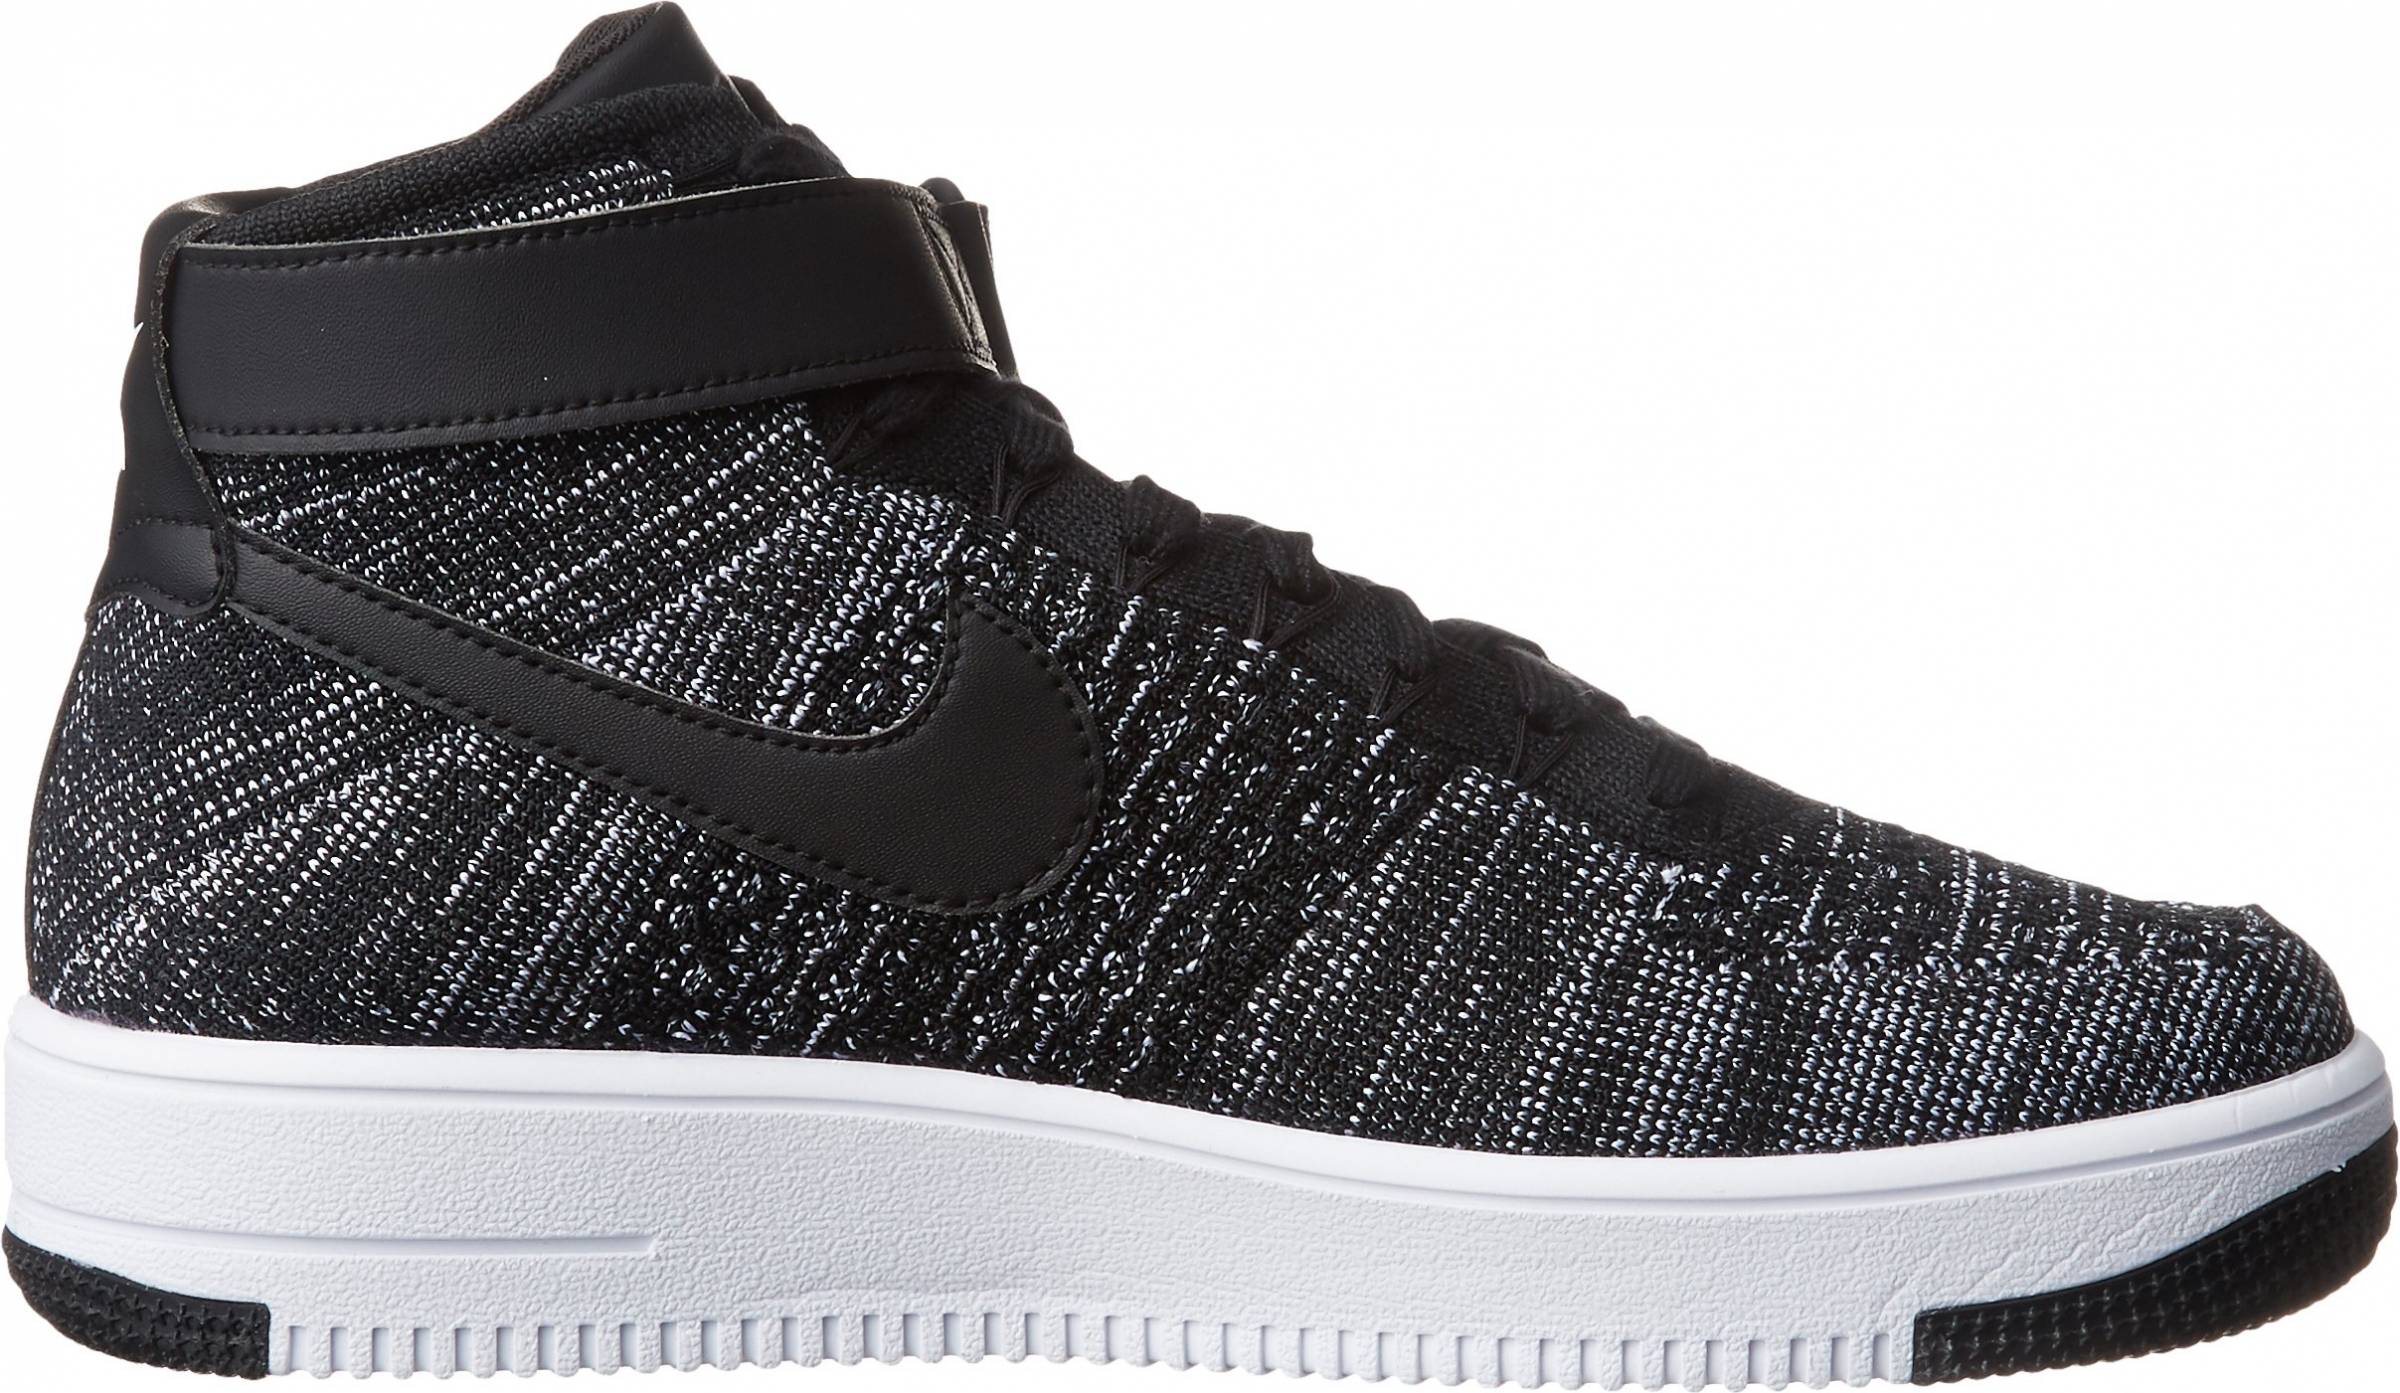 Nike Air Force 1 Ultra Flyknit Mid 